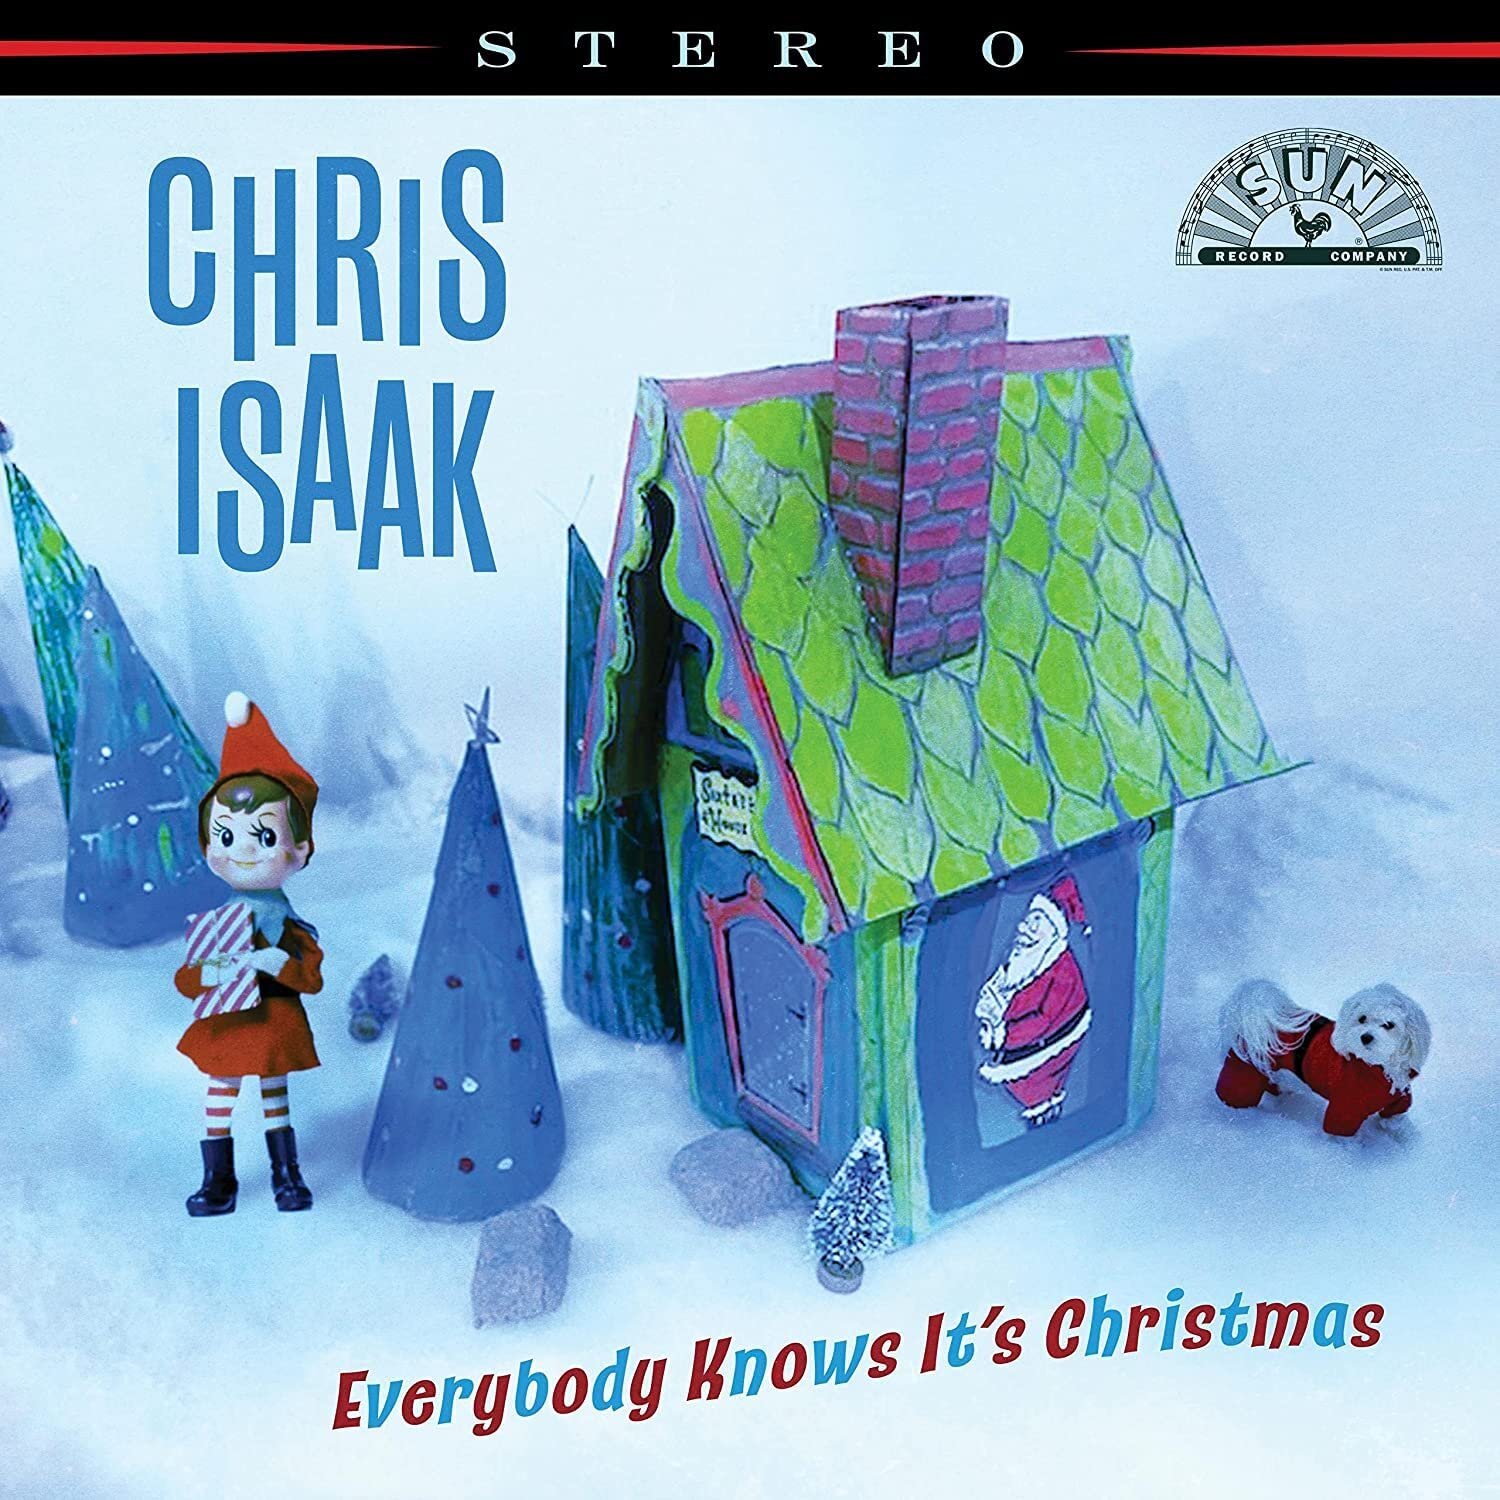 Chris Isaak Everybody Knows Its Christmas.jpeg